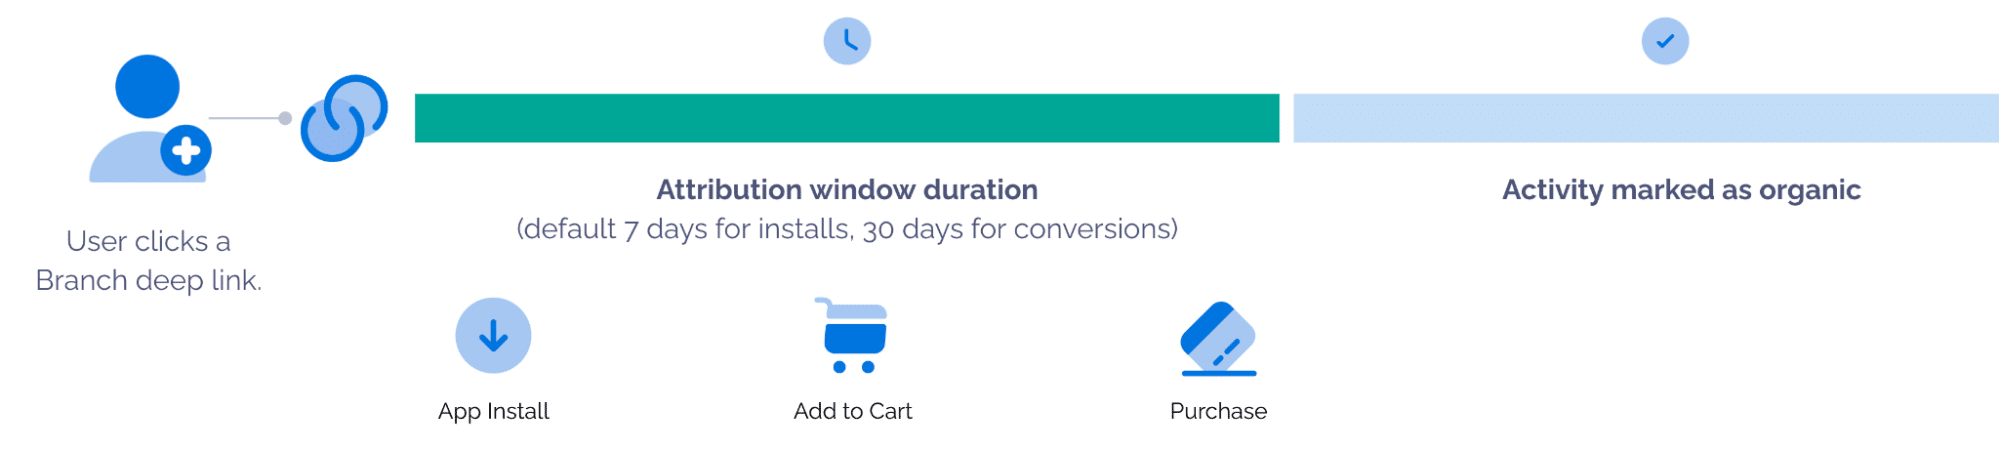 Visual representation of an attribution window. After a user clicks a Branch deep link, the attribution window duration for app install is 7 days and 30 days for conversions. After the attribution window ends, the activity is marketed as organic. 